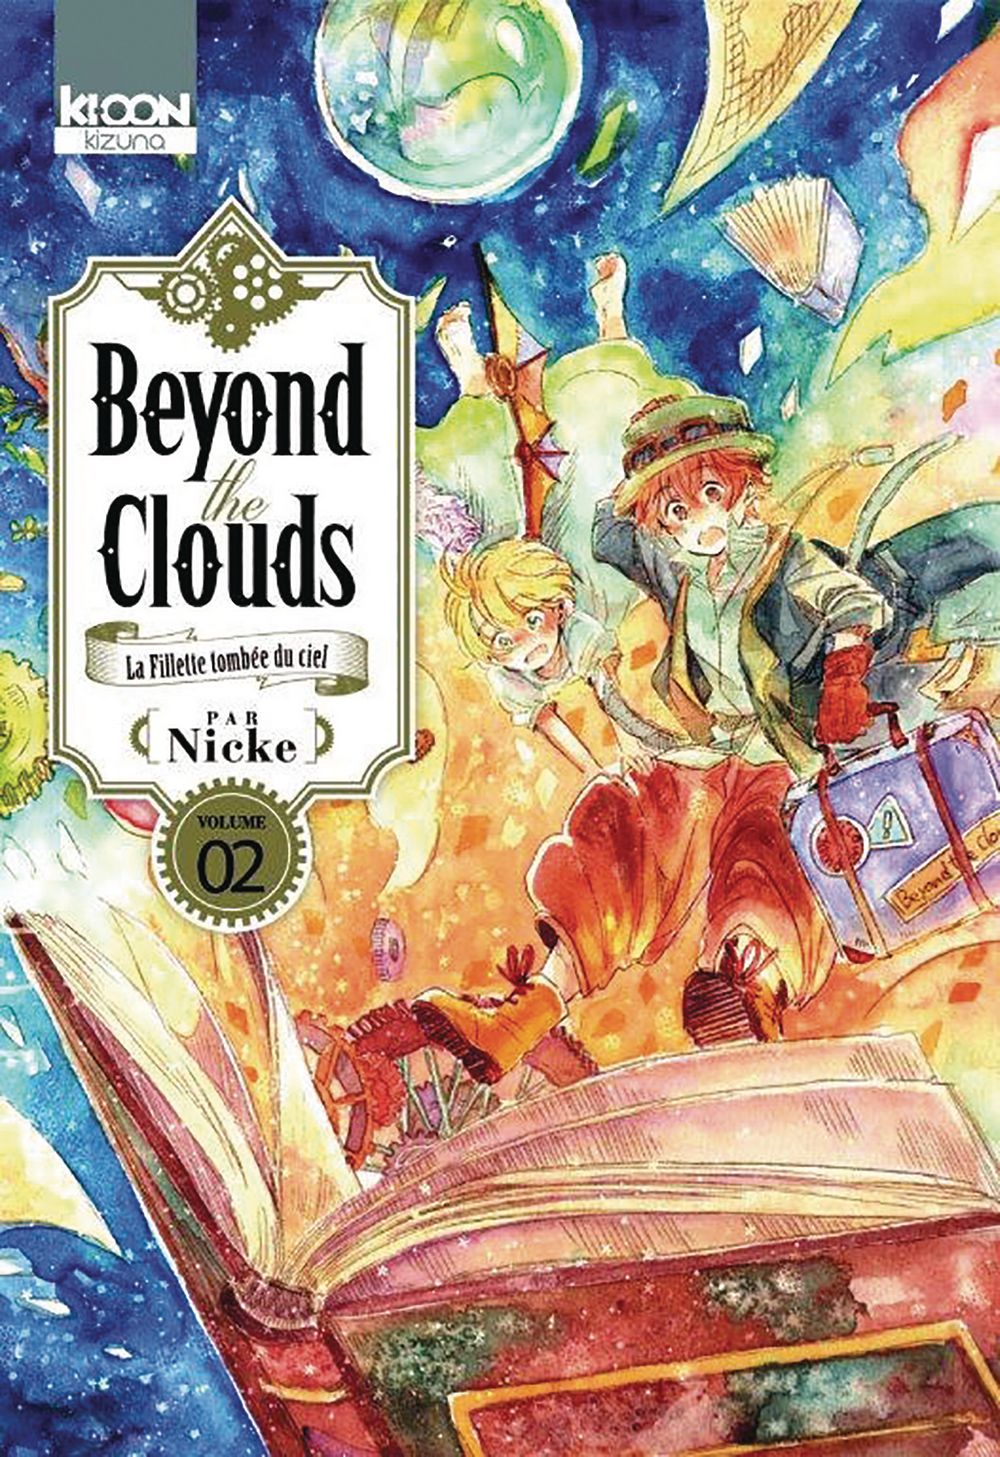 Beyond Clouds Graphic Novel Volume 02